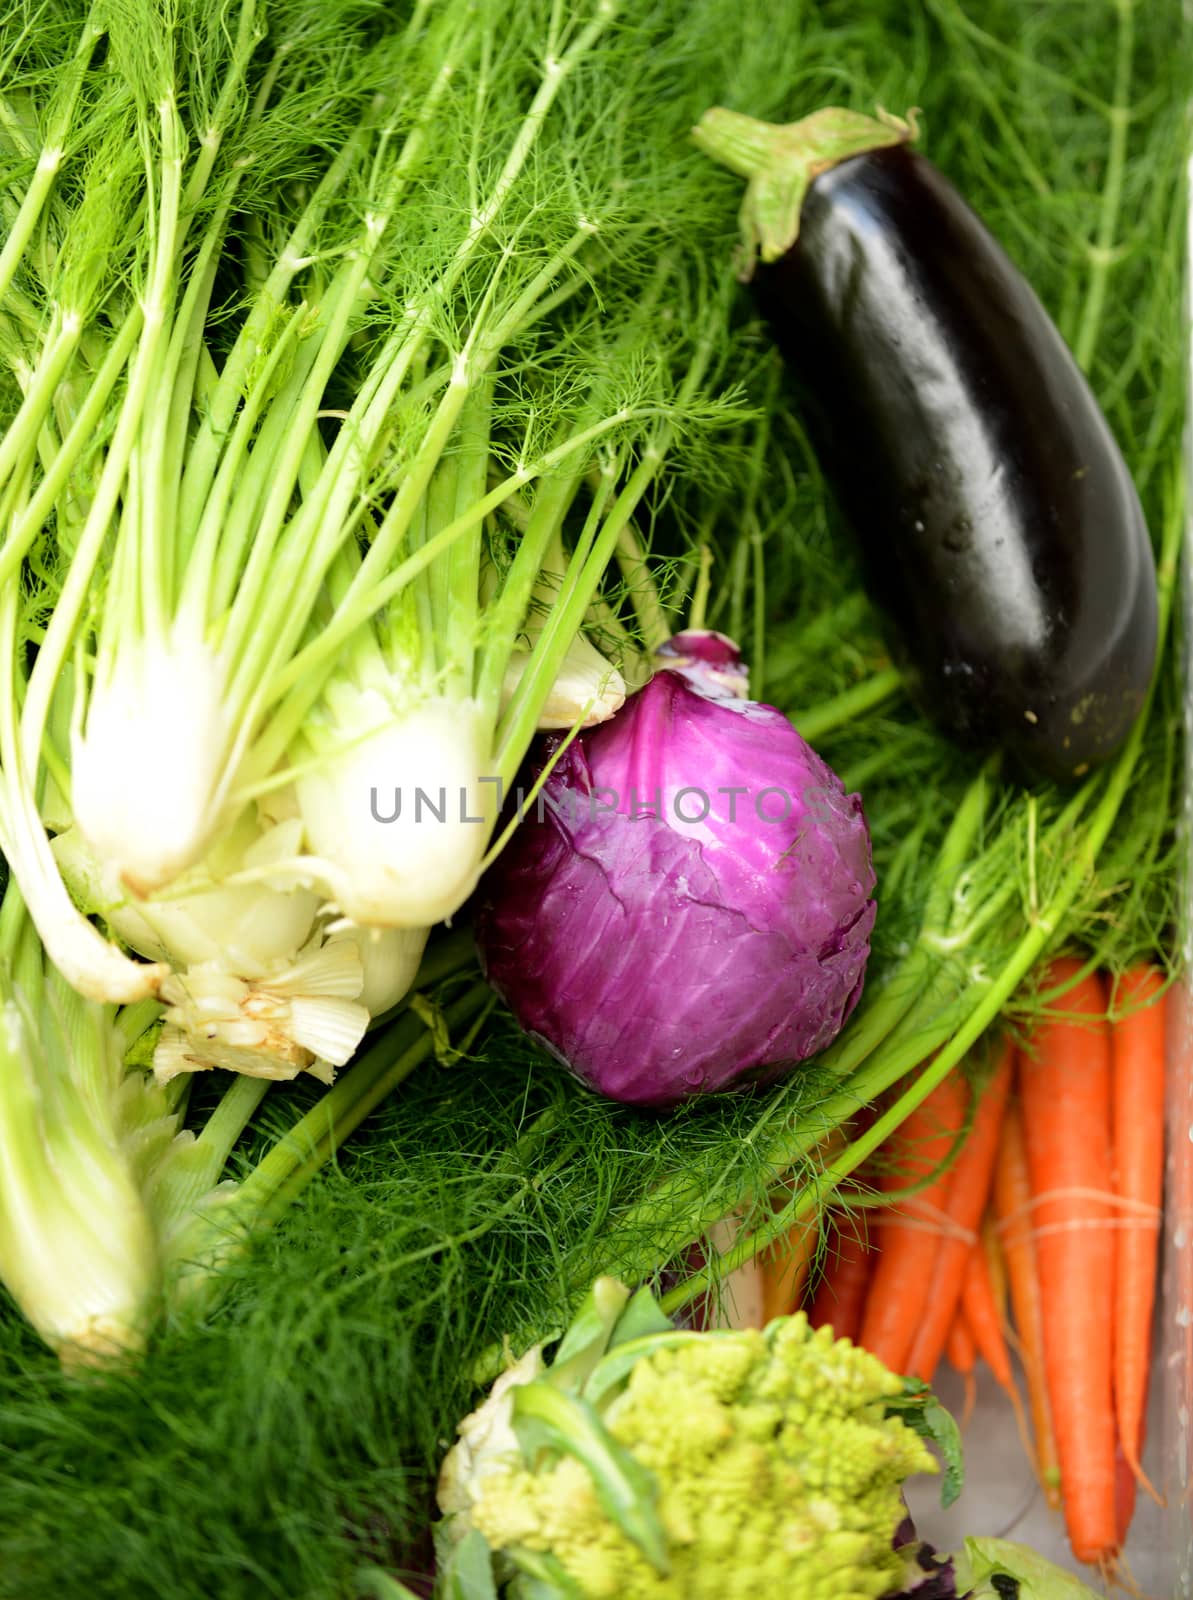 fennel, eggplant and cabbage for sale at a farmer's market